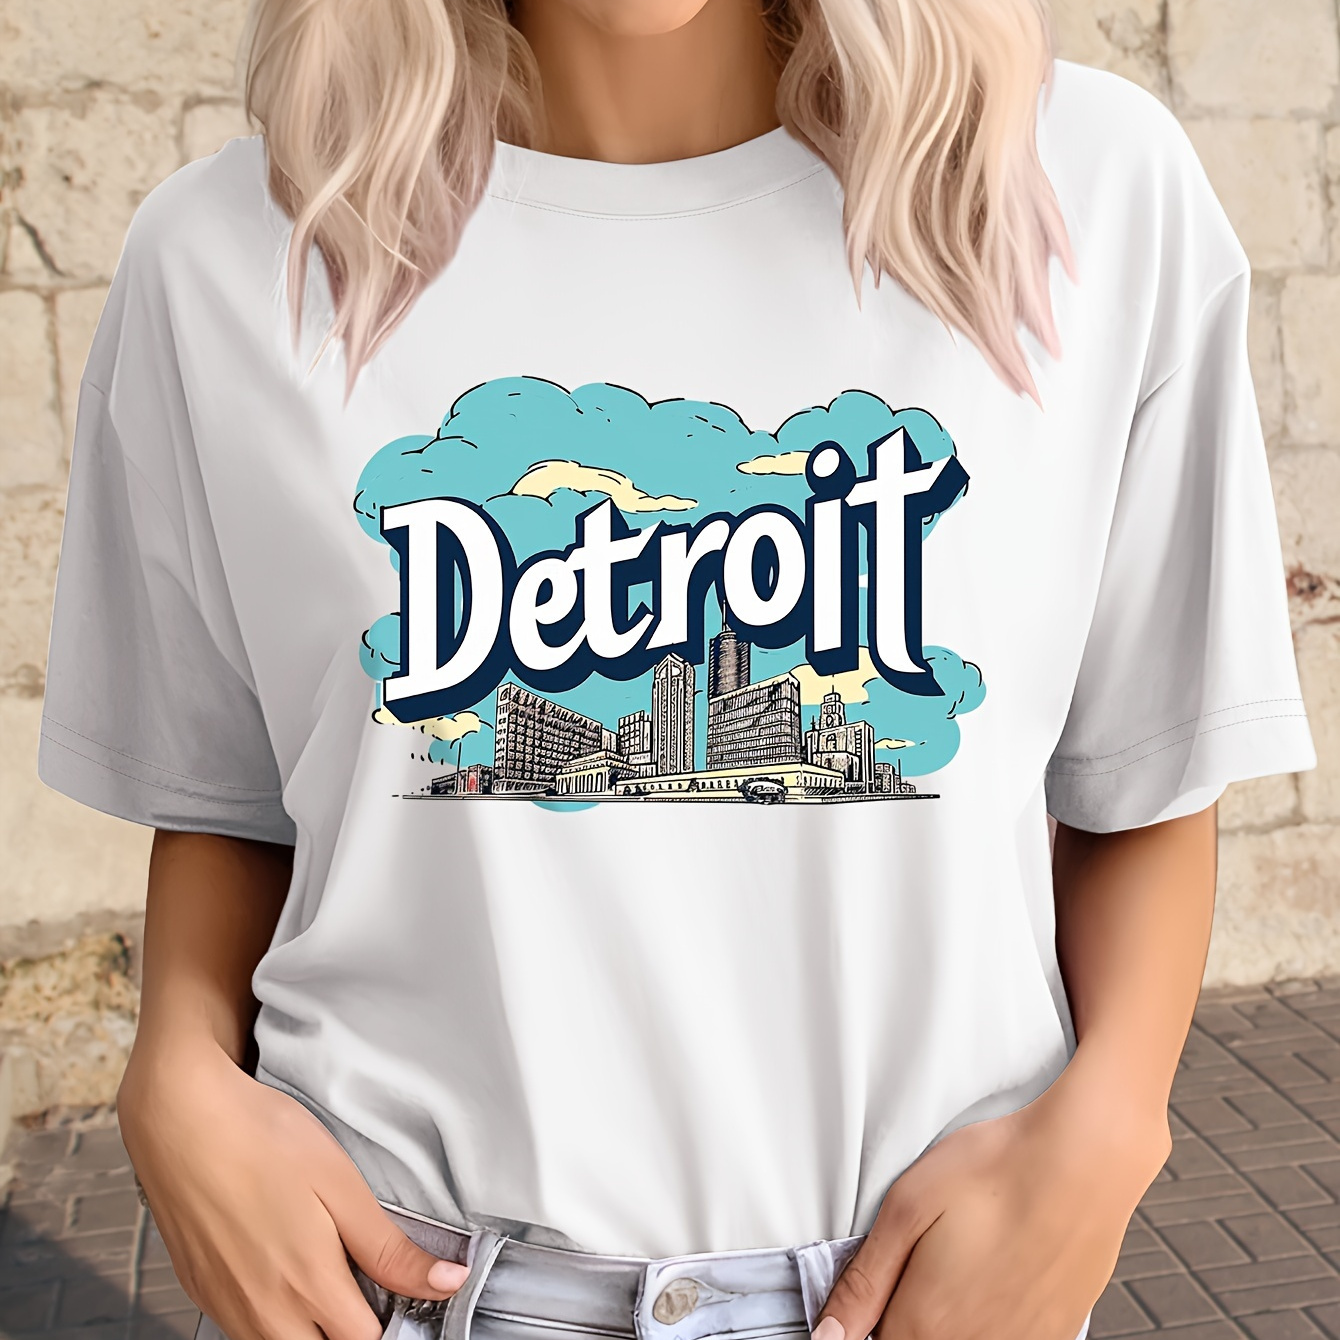 

Detroit & Building Print Crew Neck T-shirt, Casual Short Sleeve Top For Summer & Spring, Women's Clothing